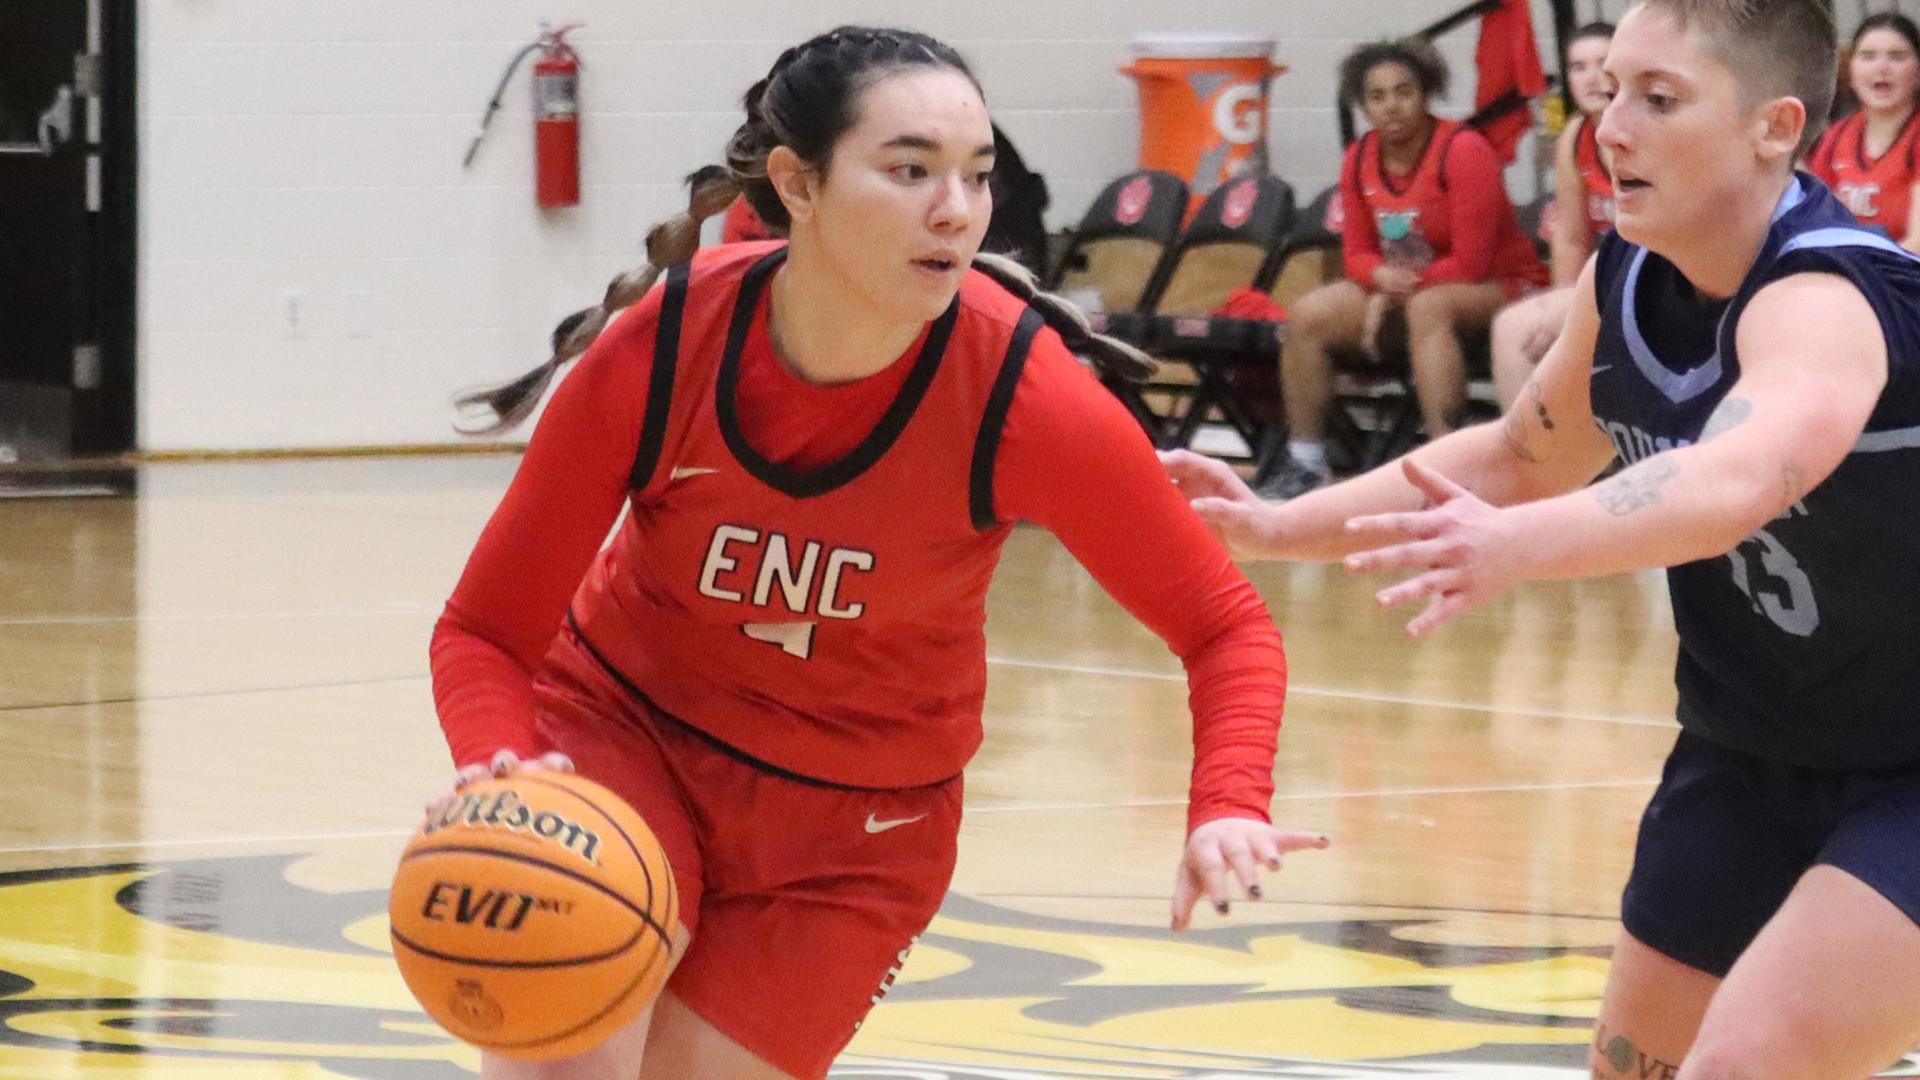 Ayala, Paquet Power Women’s Hoops Past SUNY Canton Friday, 80-68